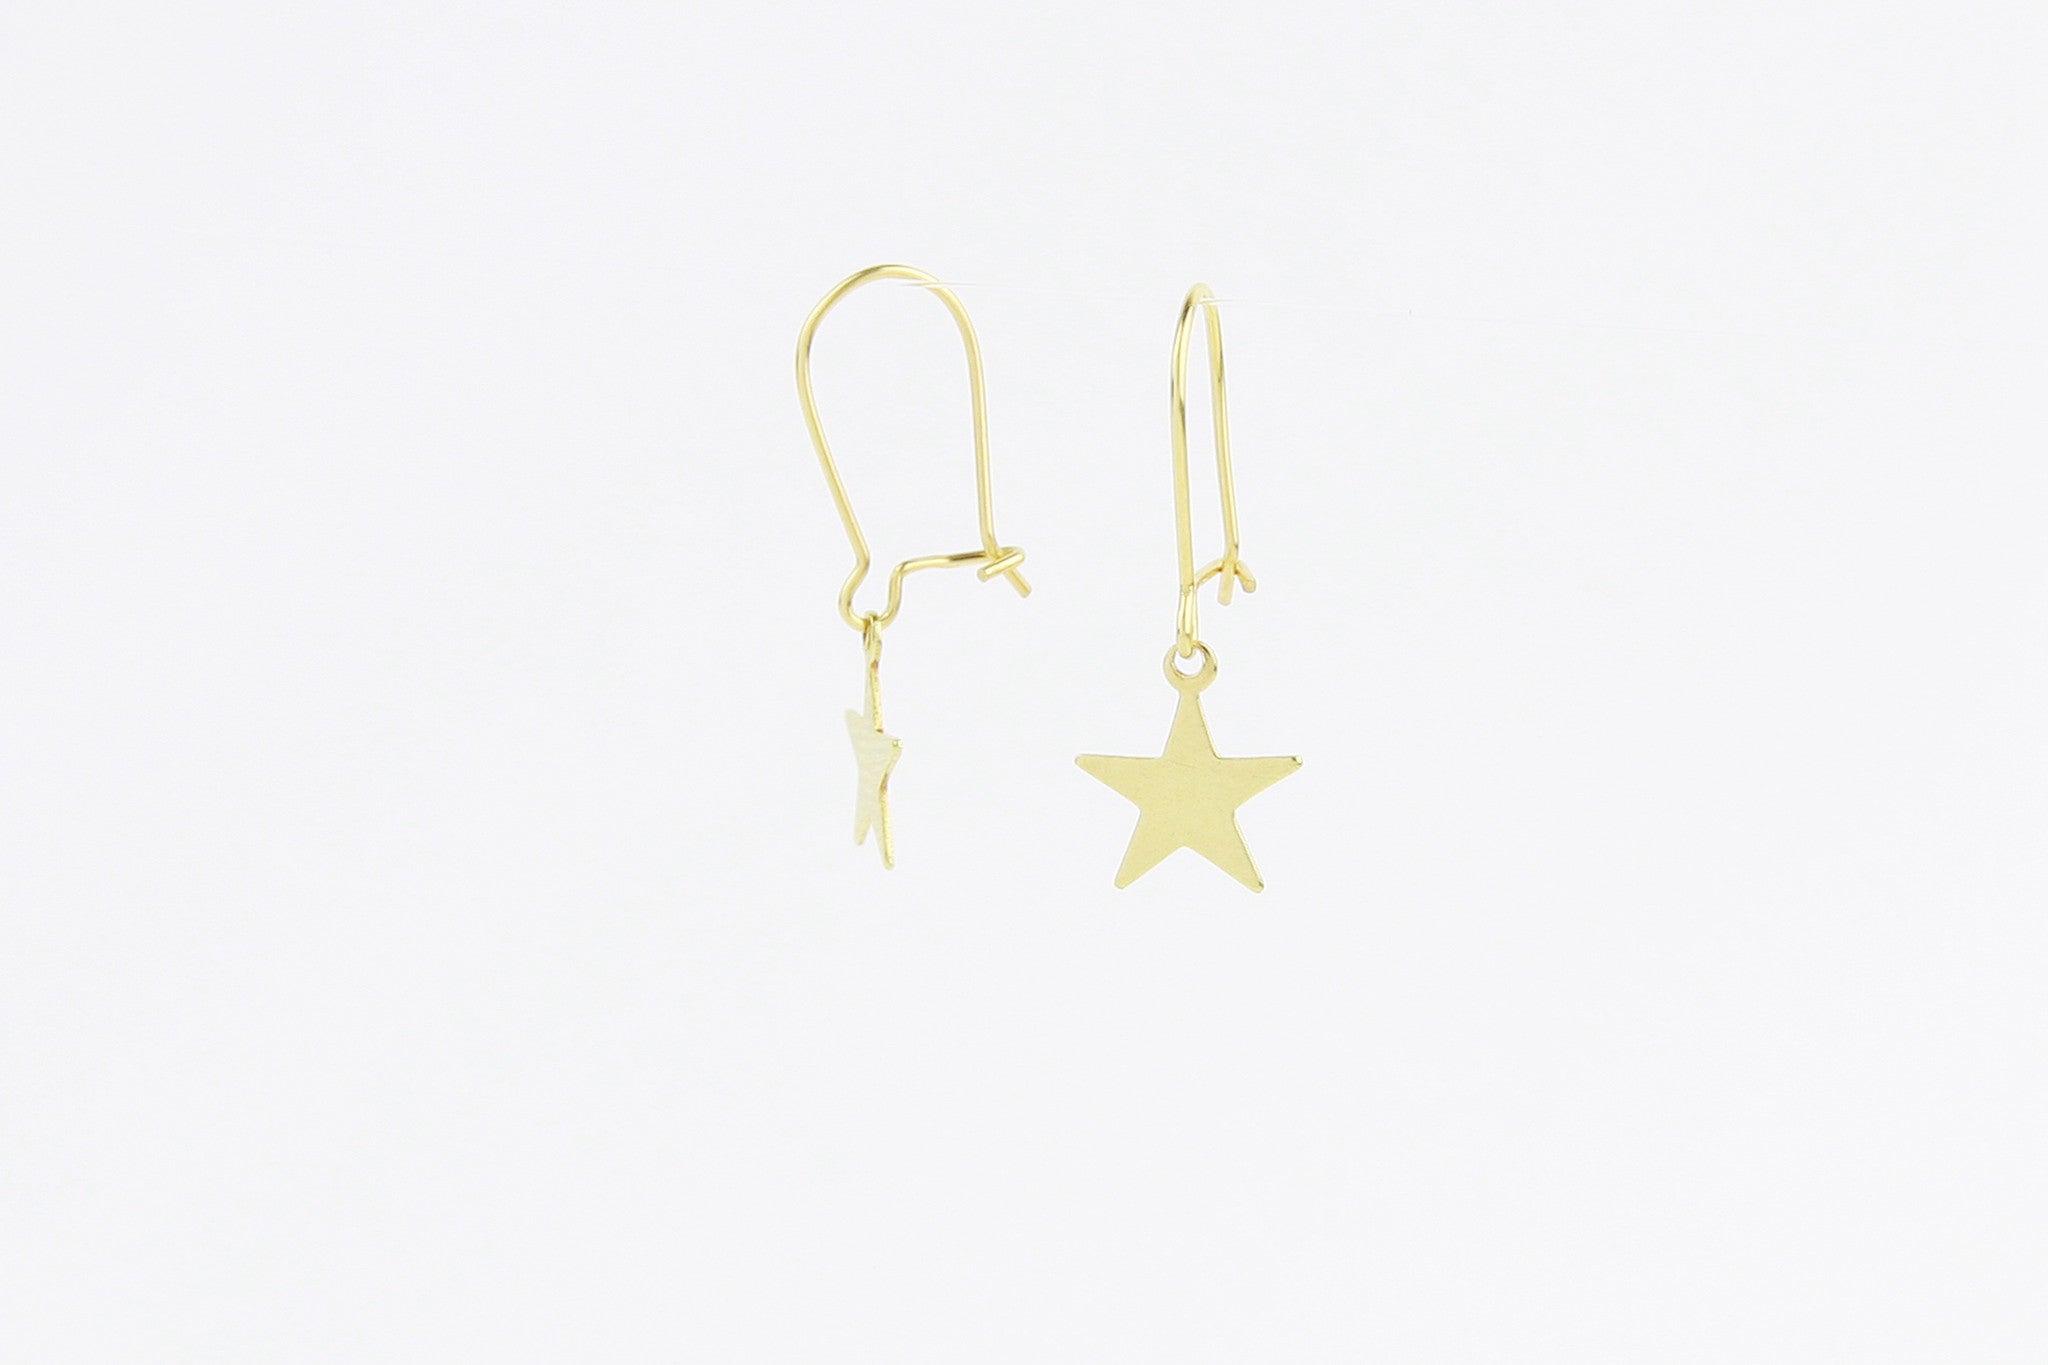 jewelberry ohrringe earrings plain star yellow gold plated sterling silver fine jewelry handmade with love fairtrade